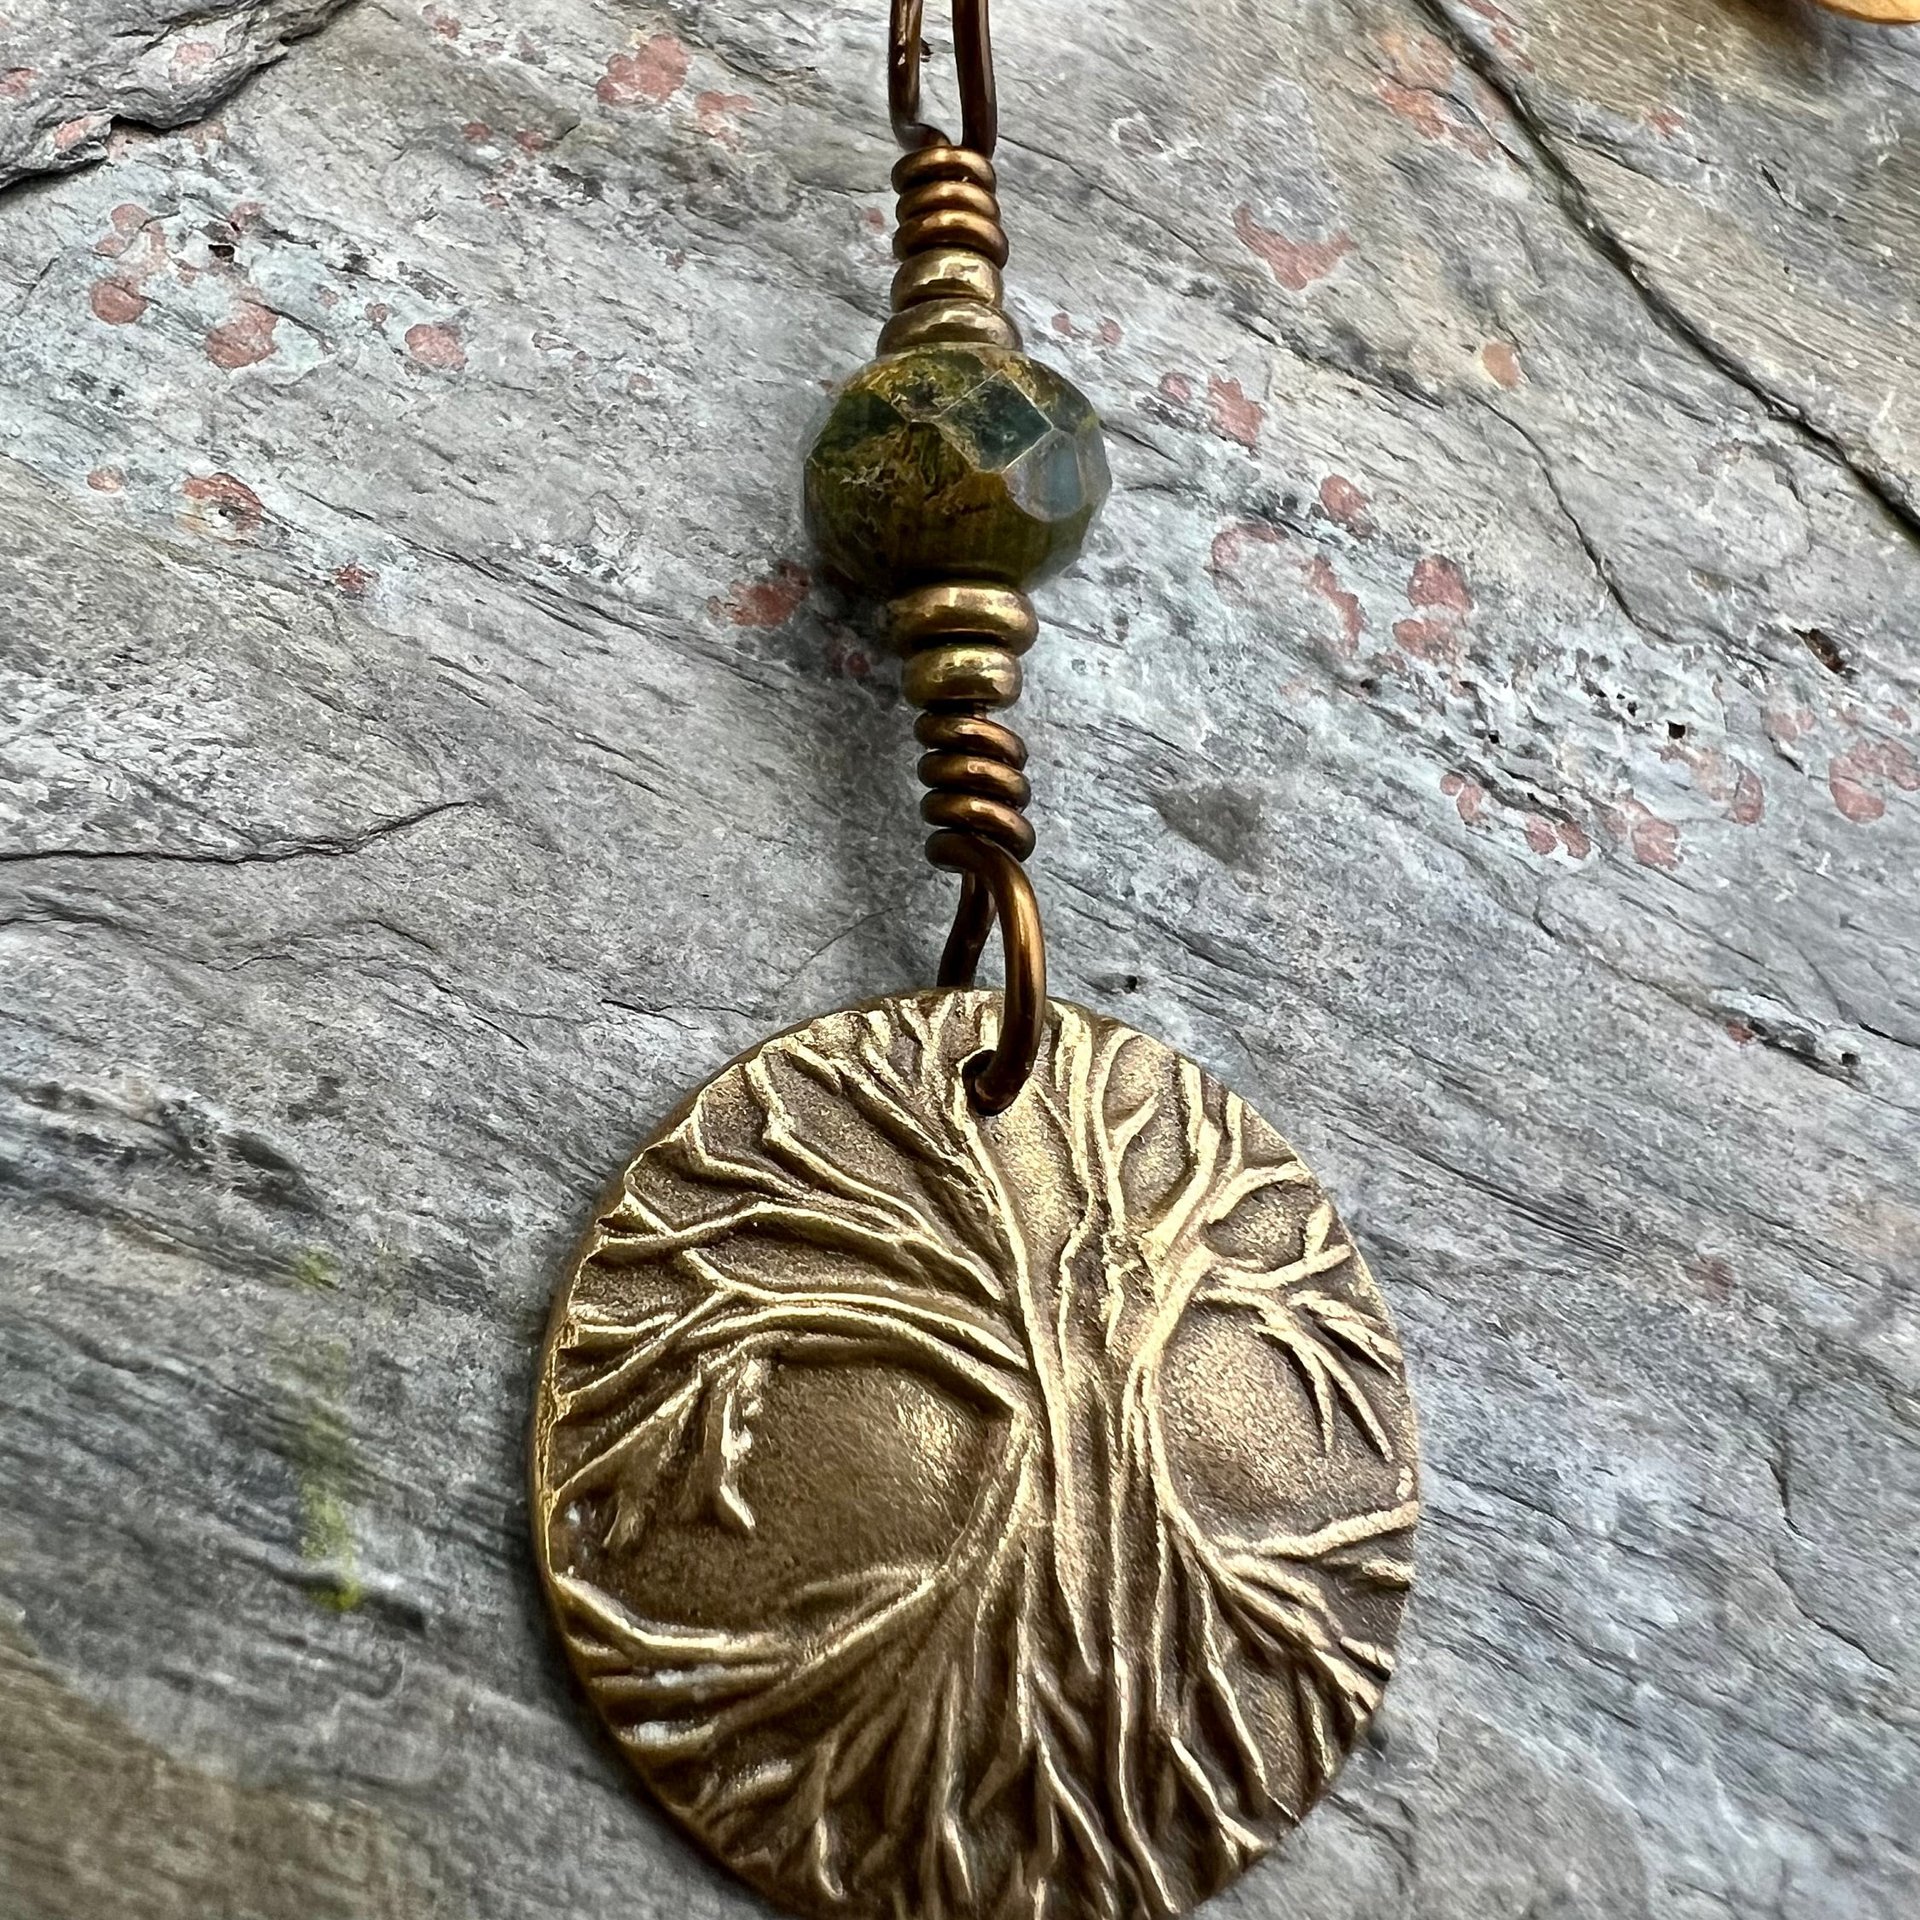 Tree of Life Charm, Bronze Necklace, Tree Branches, Czech Glass Bead, Disc Charm Pendant, Hand Carved, Celtic Witch, Pagan Druid, Earth Love